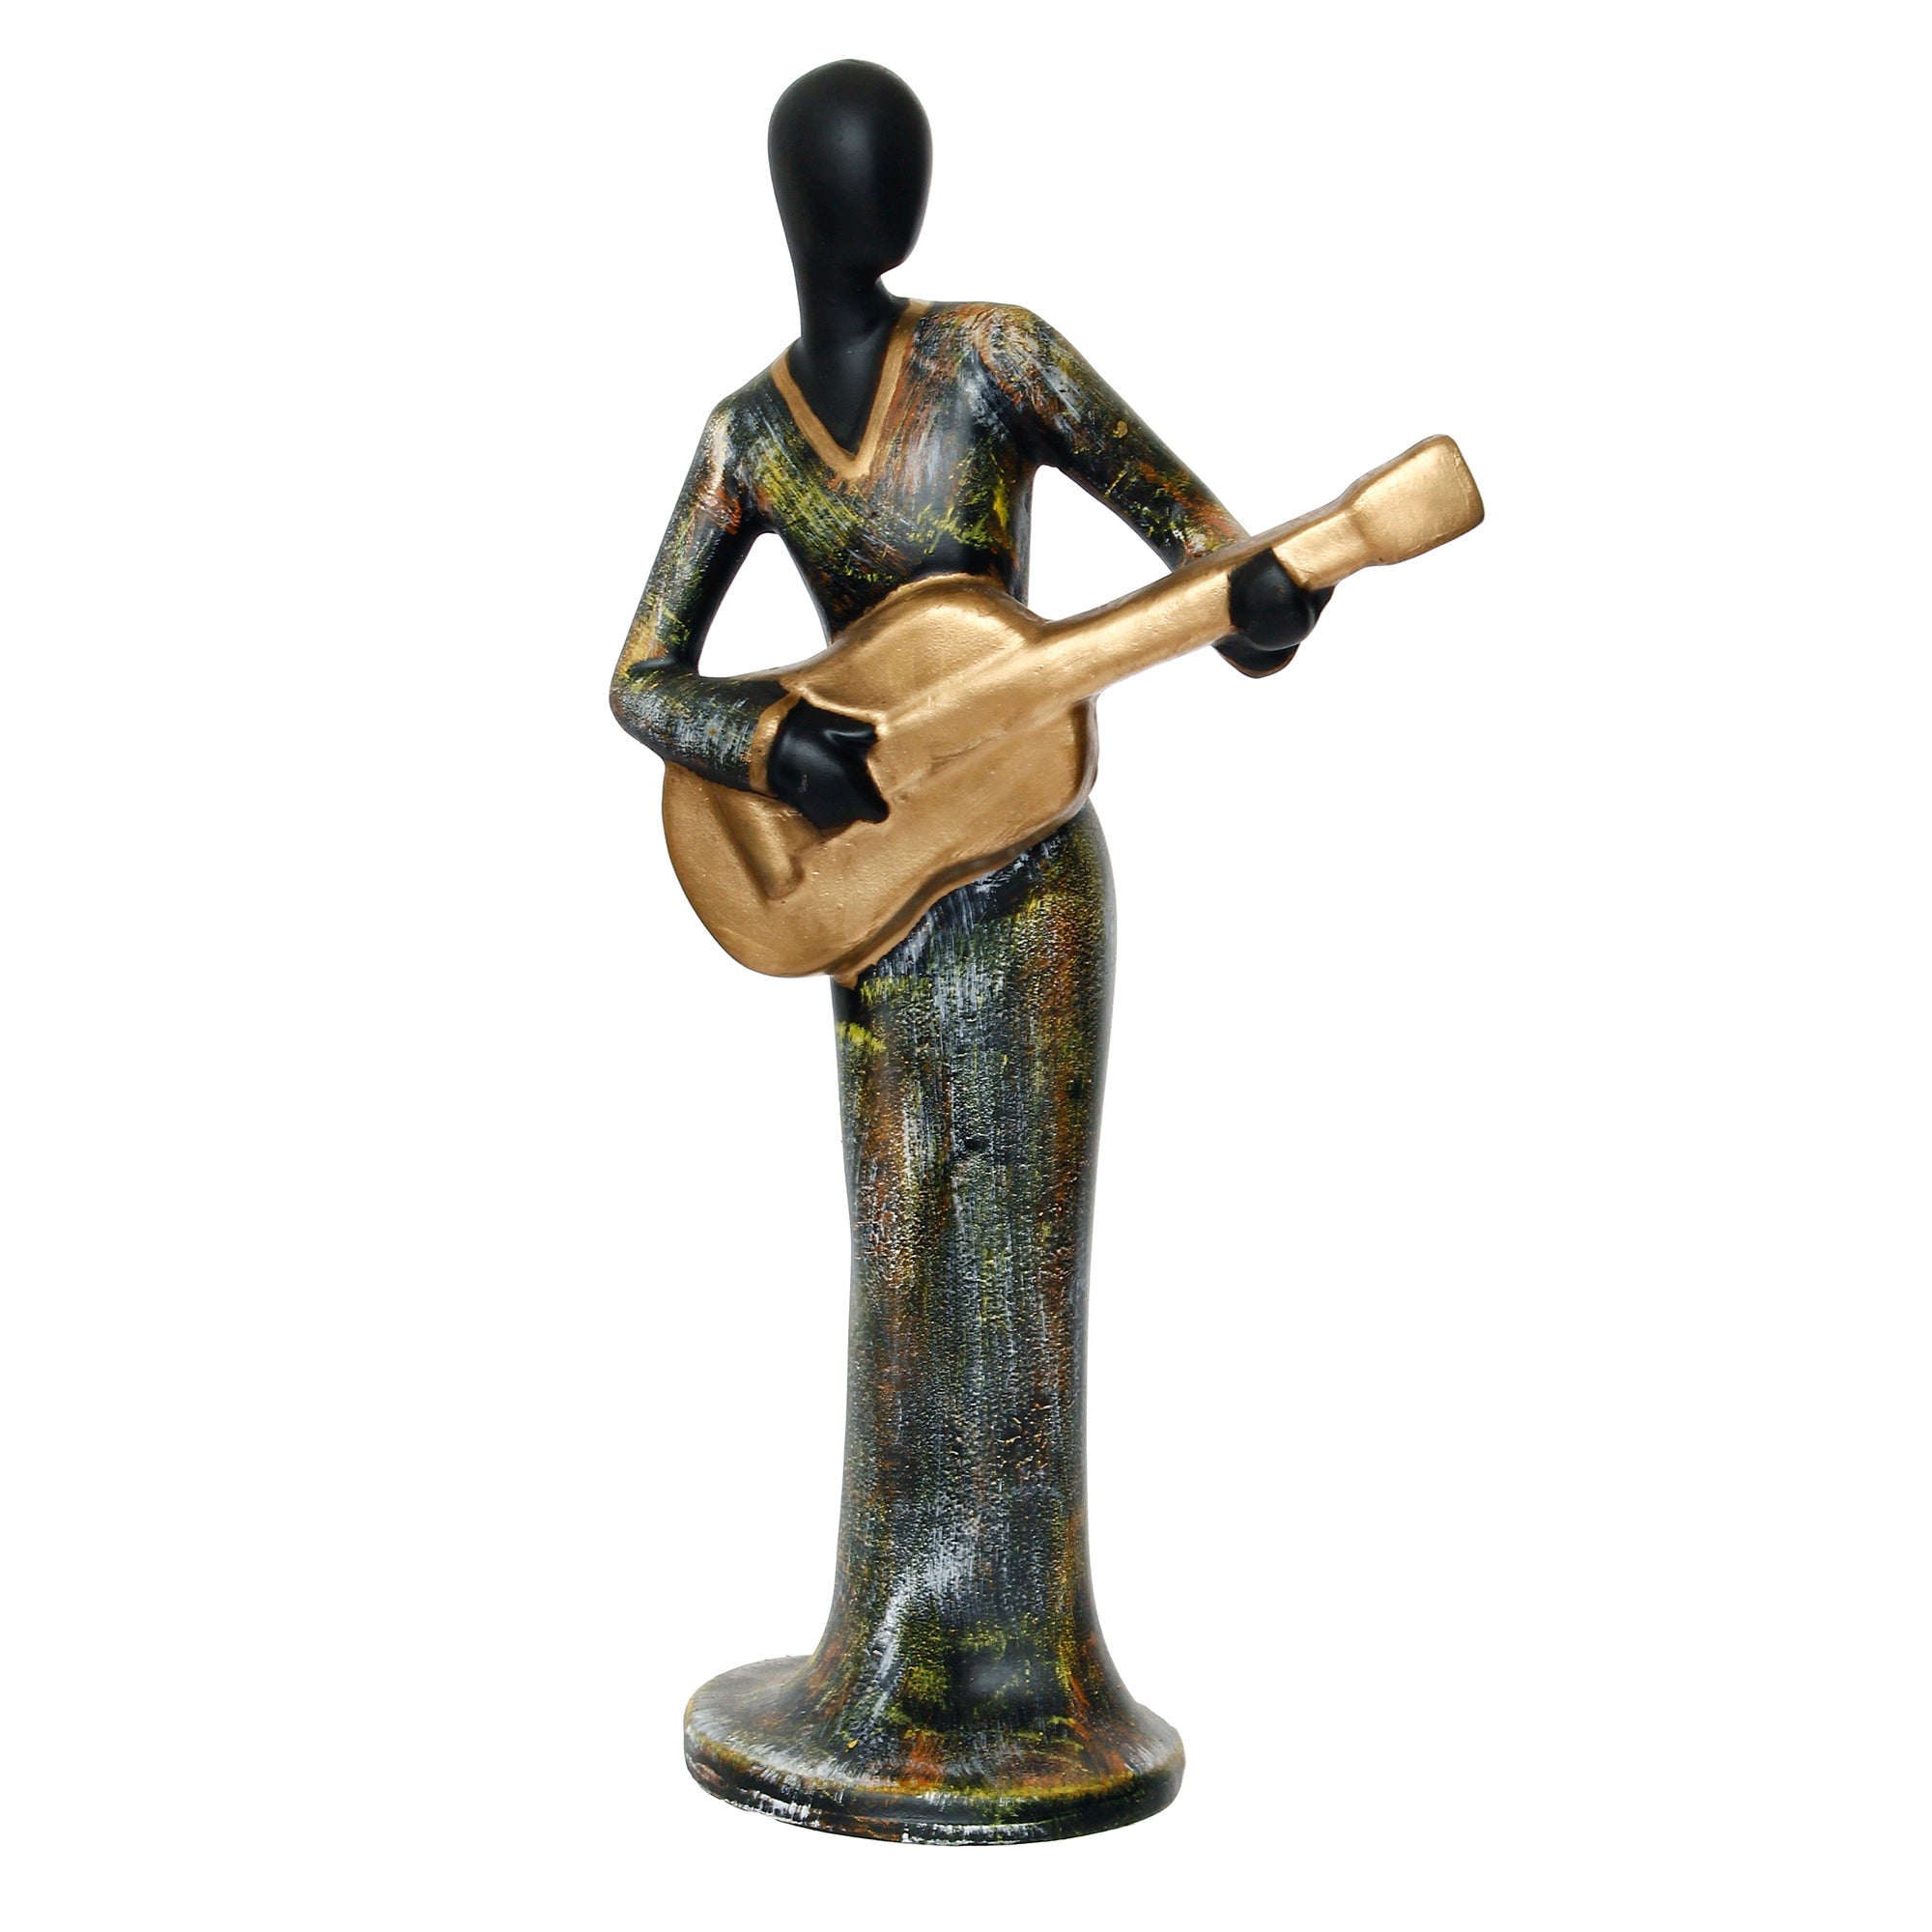 Grey and Black Polyresin Lady figurine Playing Guitar Musical Instrument Handcrafted Decorative Showpiece 2